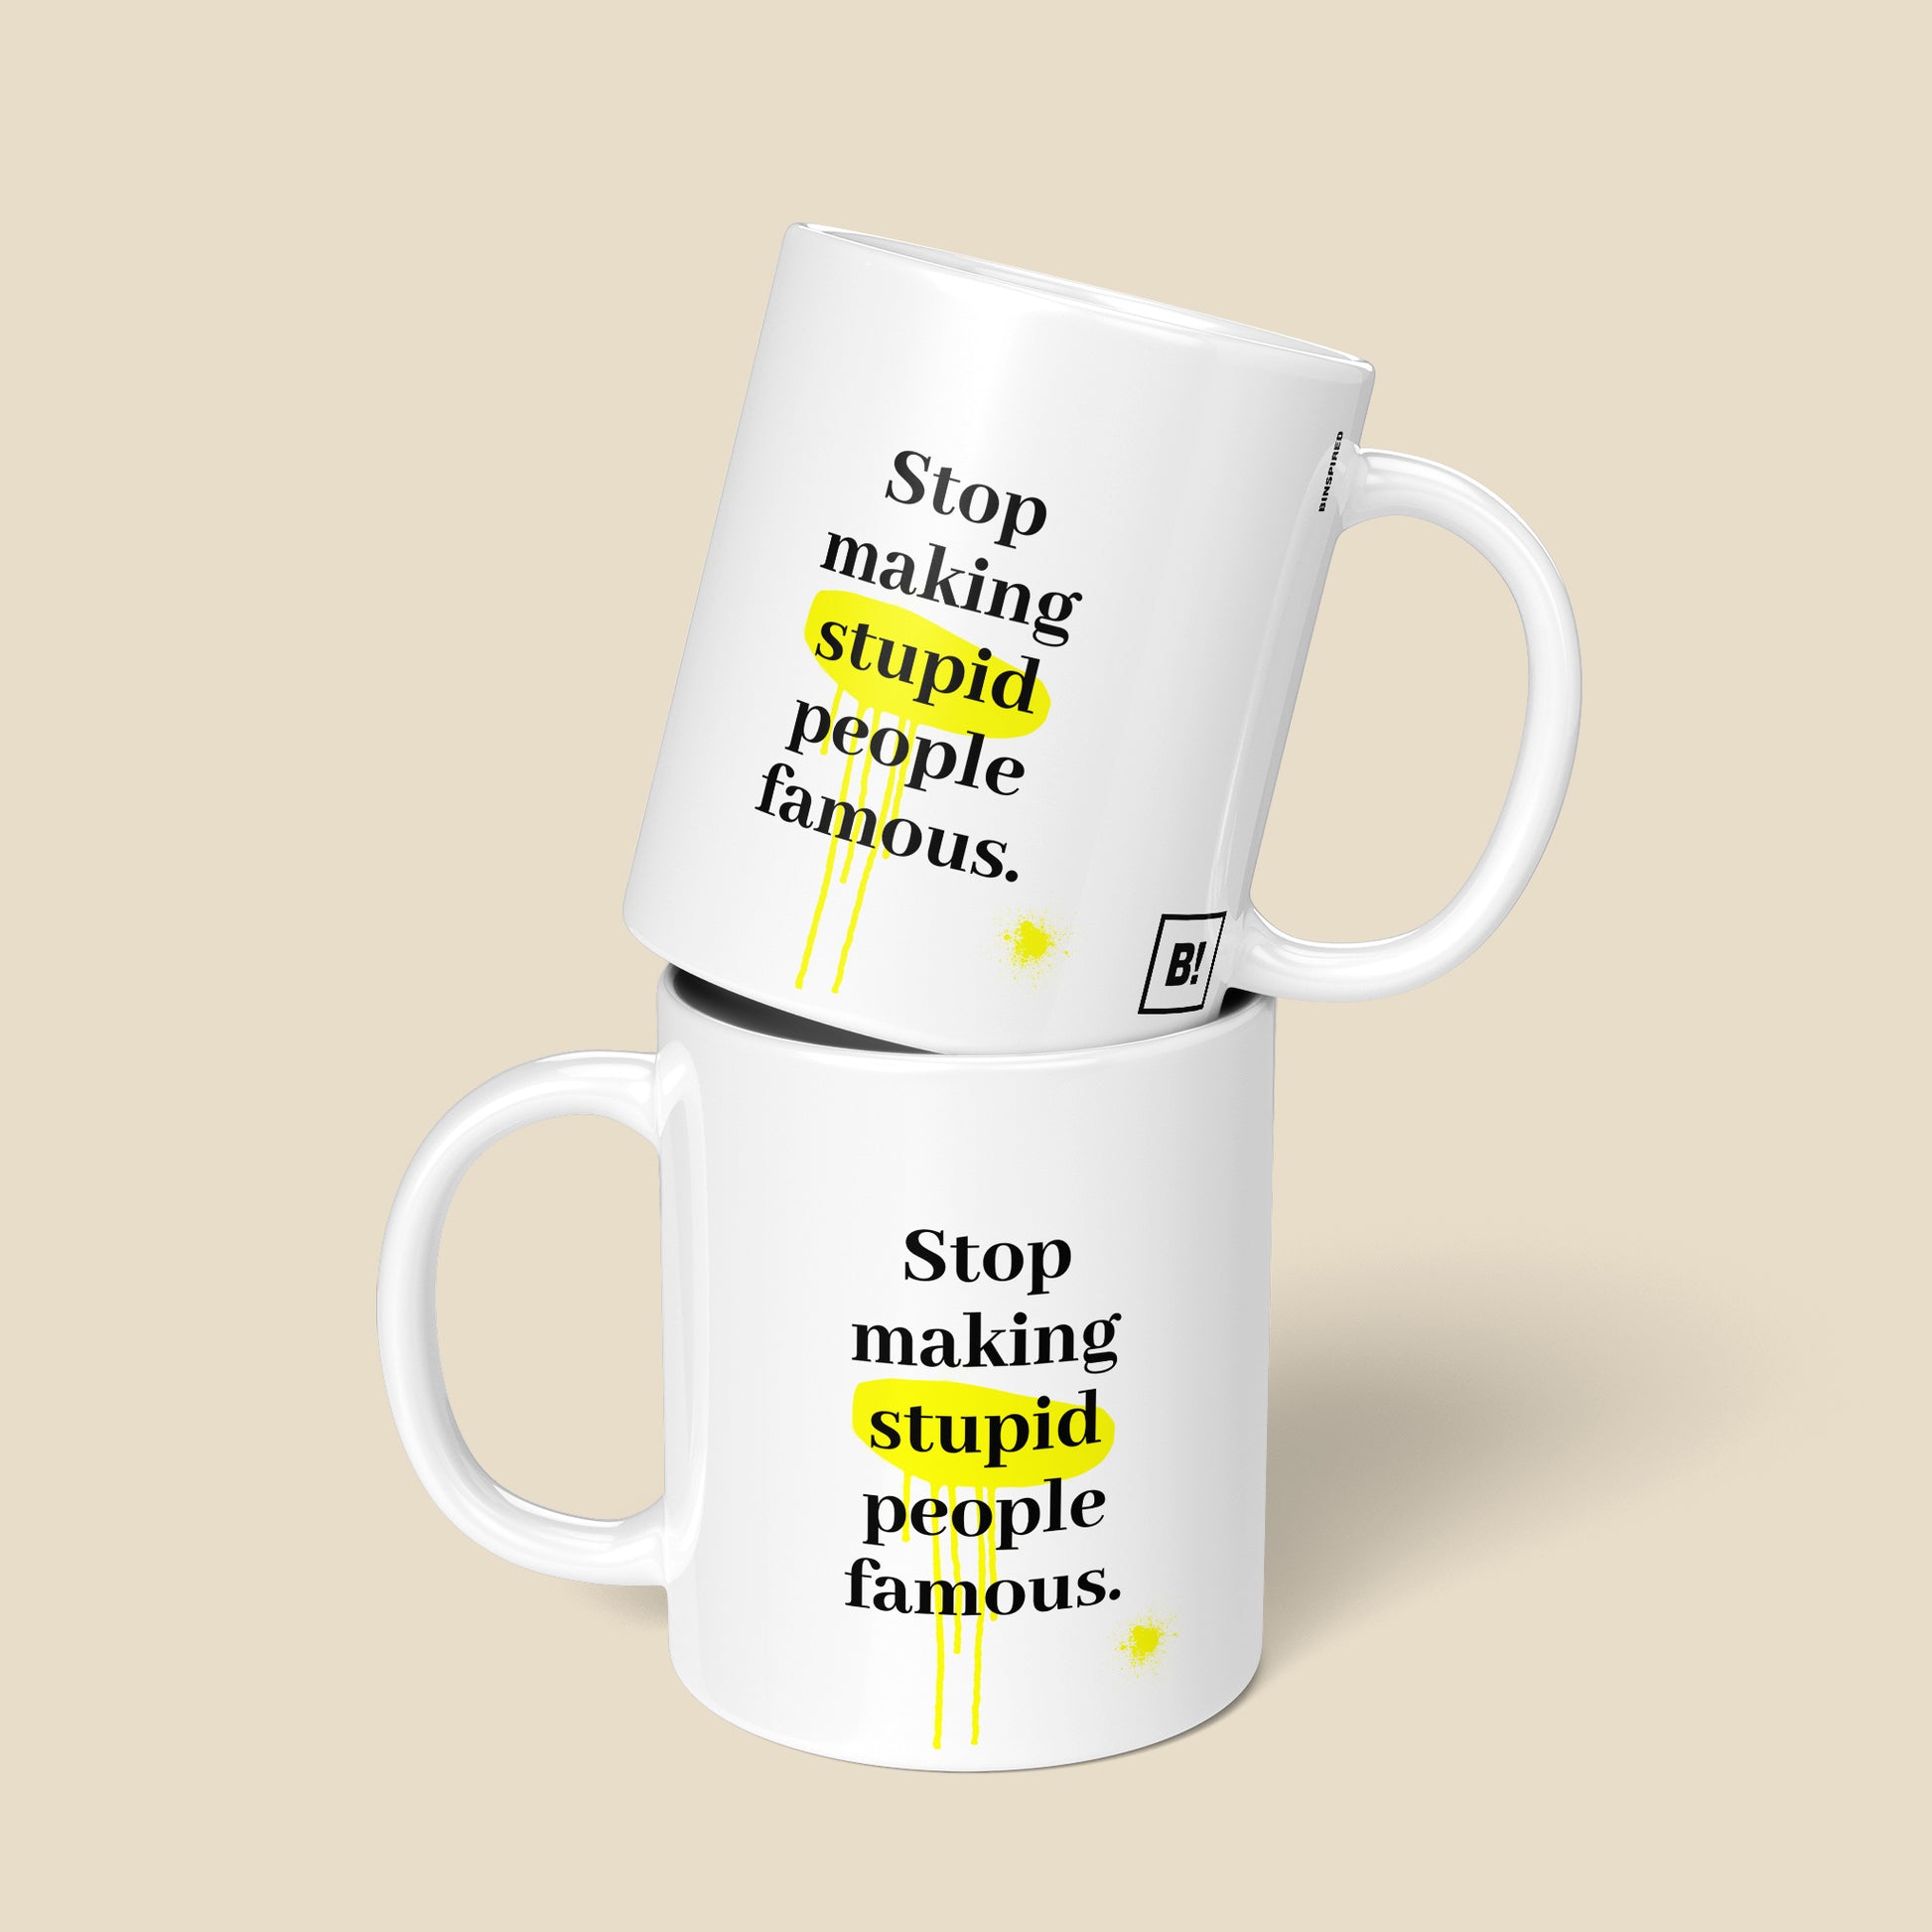 Get inspired by the quote, "Stop Making Stupid People Famous" on this 11oz white glossy coffee mug with a front and back view.